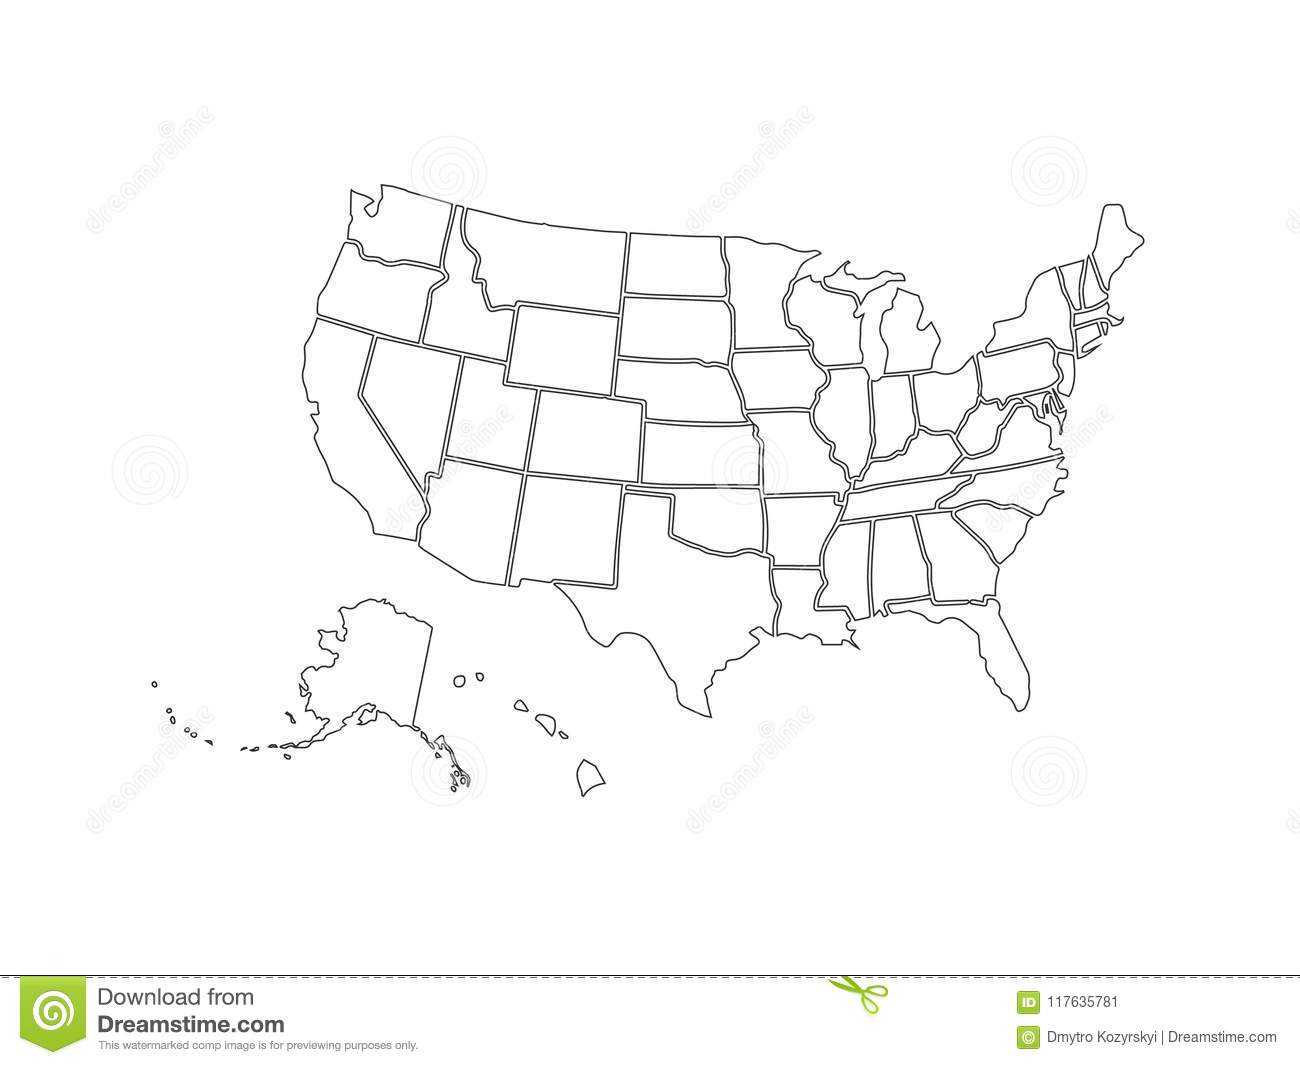 Blank Similar Usa Map Isolated On White Background. United With Blank Template Of The United States